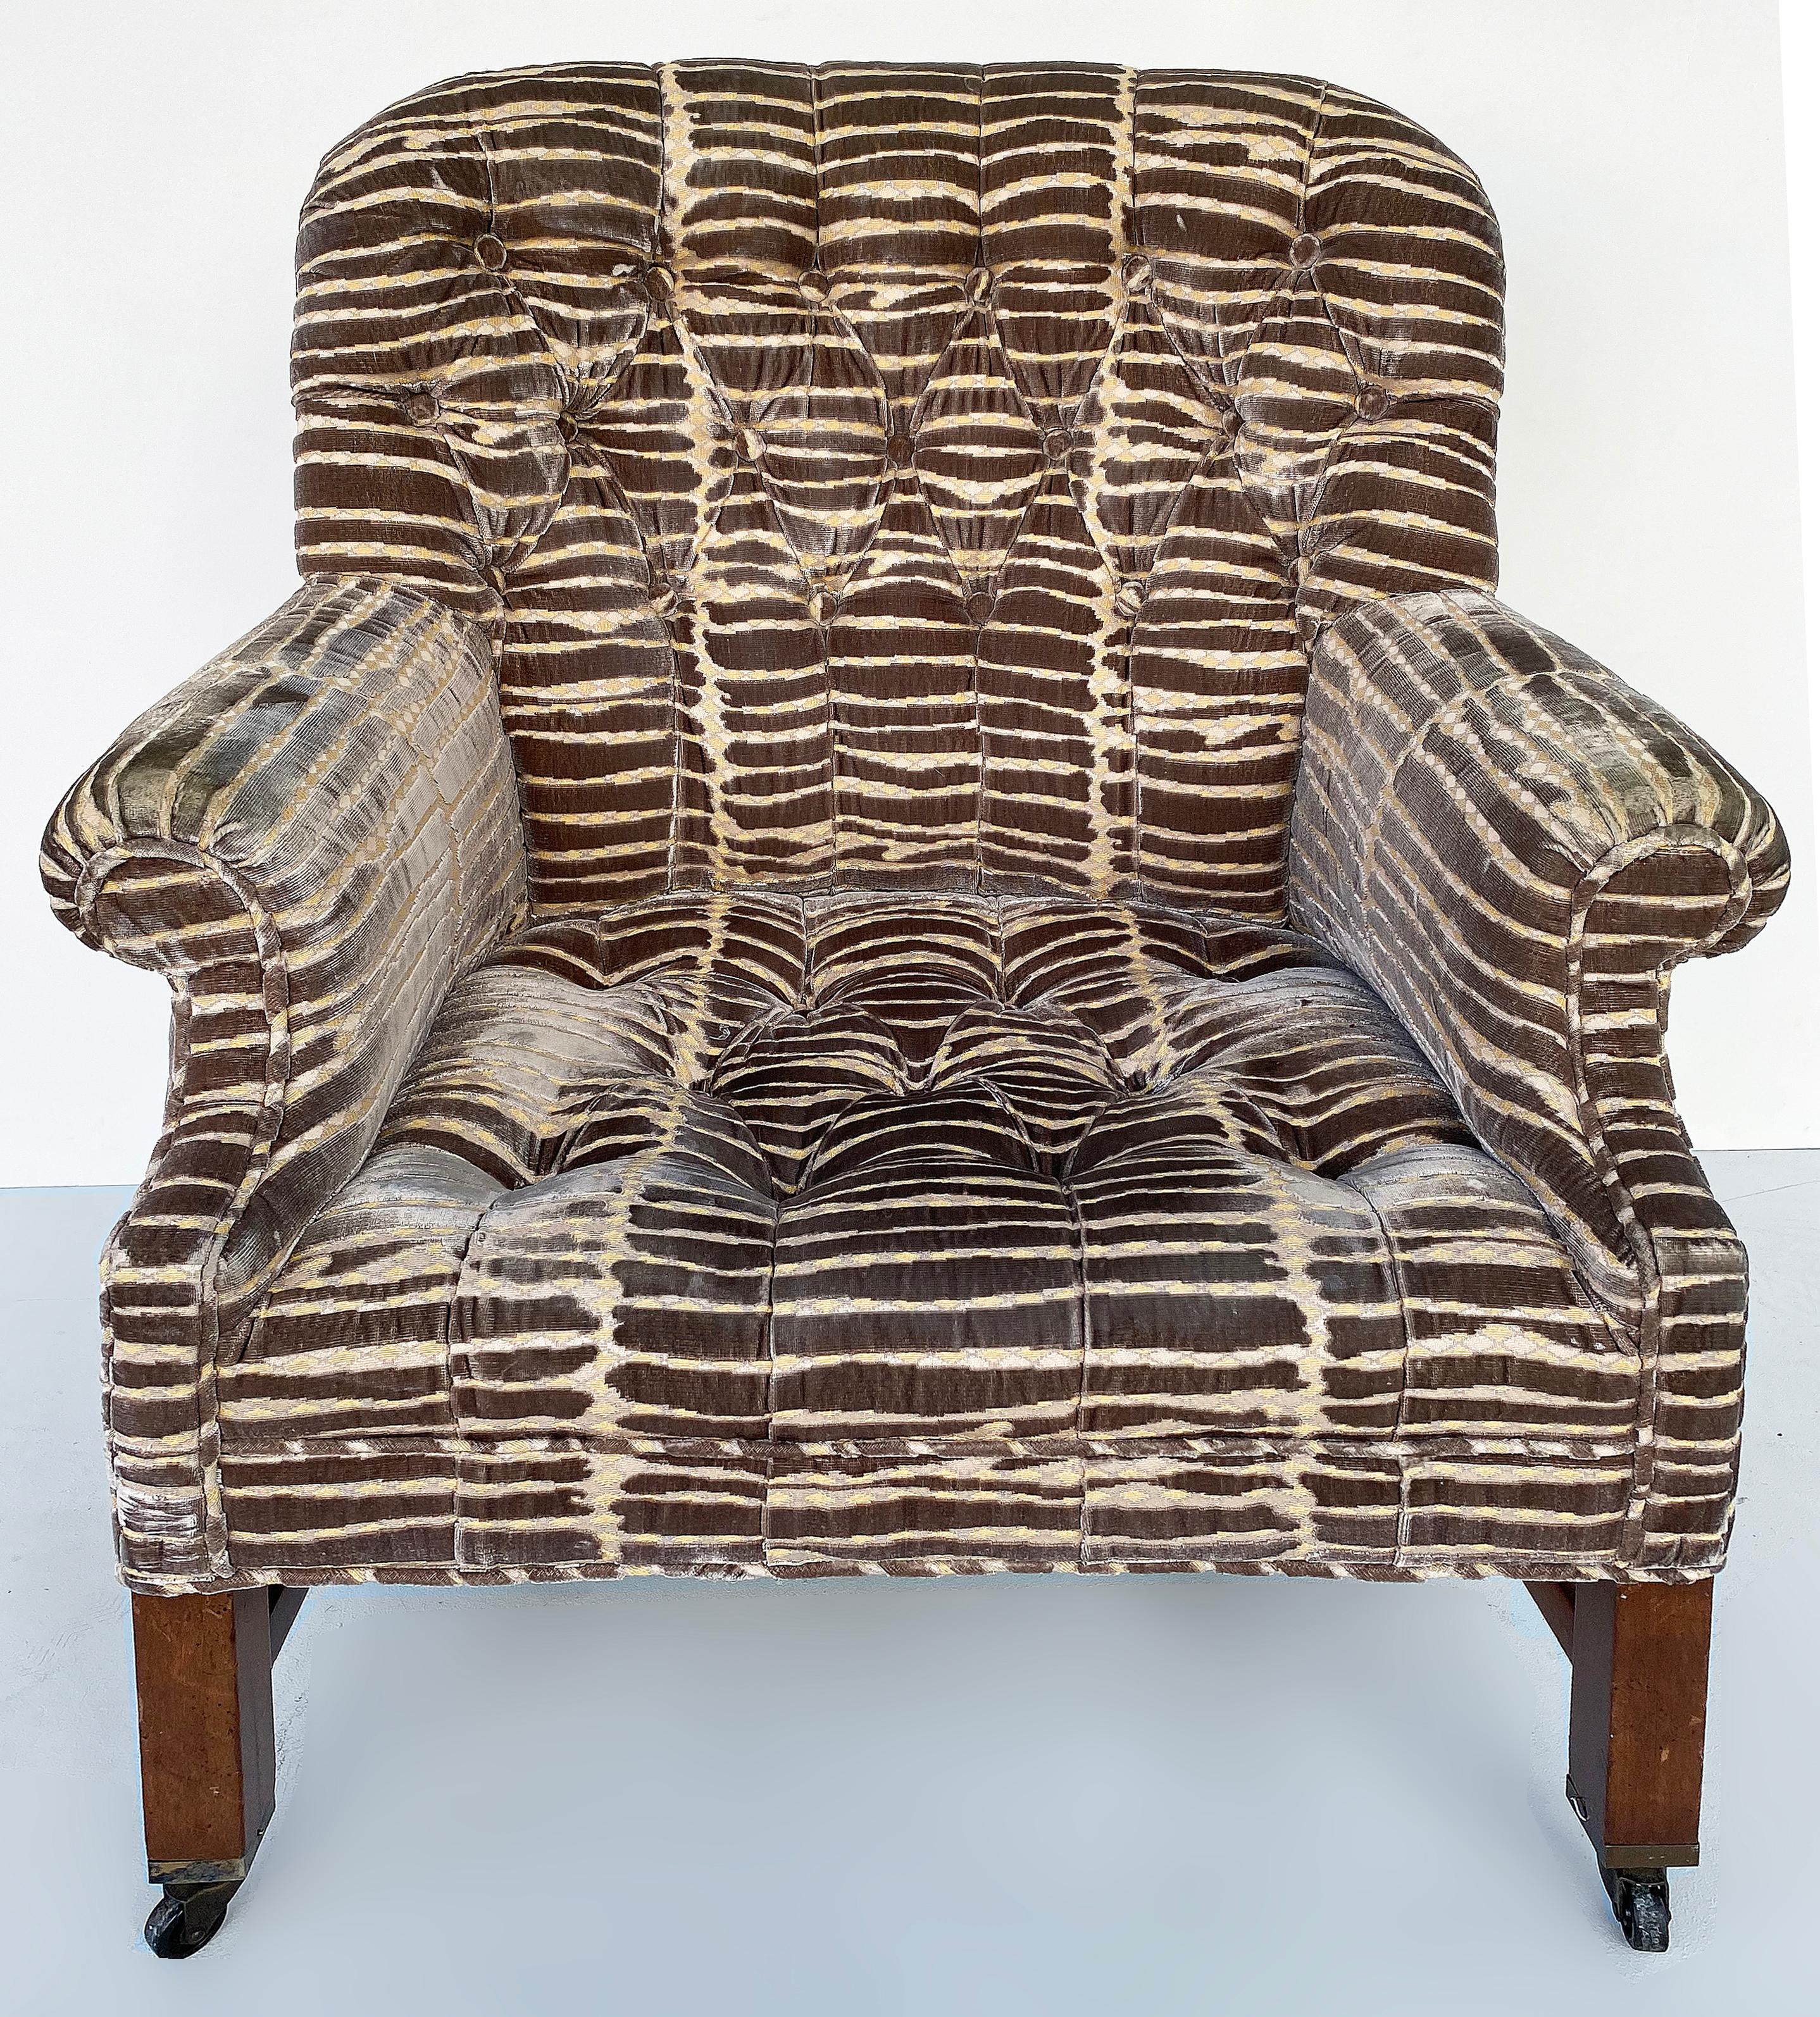 Vintage Baker Gentleman's Club Chairs with Ottoman, Upholstered

Offered for sale is a pair of vintage Baker gentleman's club chairs which have been recently upholstered in a patterned velvet. The chairs are supported by a dark wood frame. The set